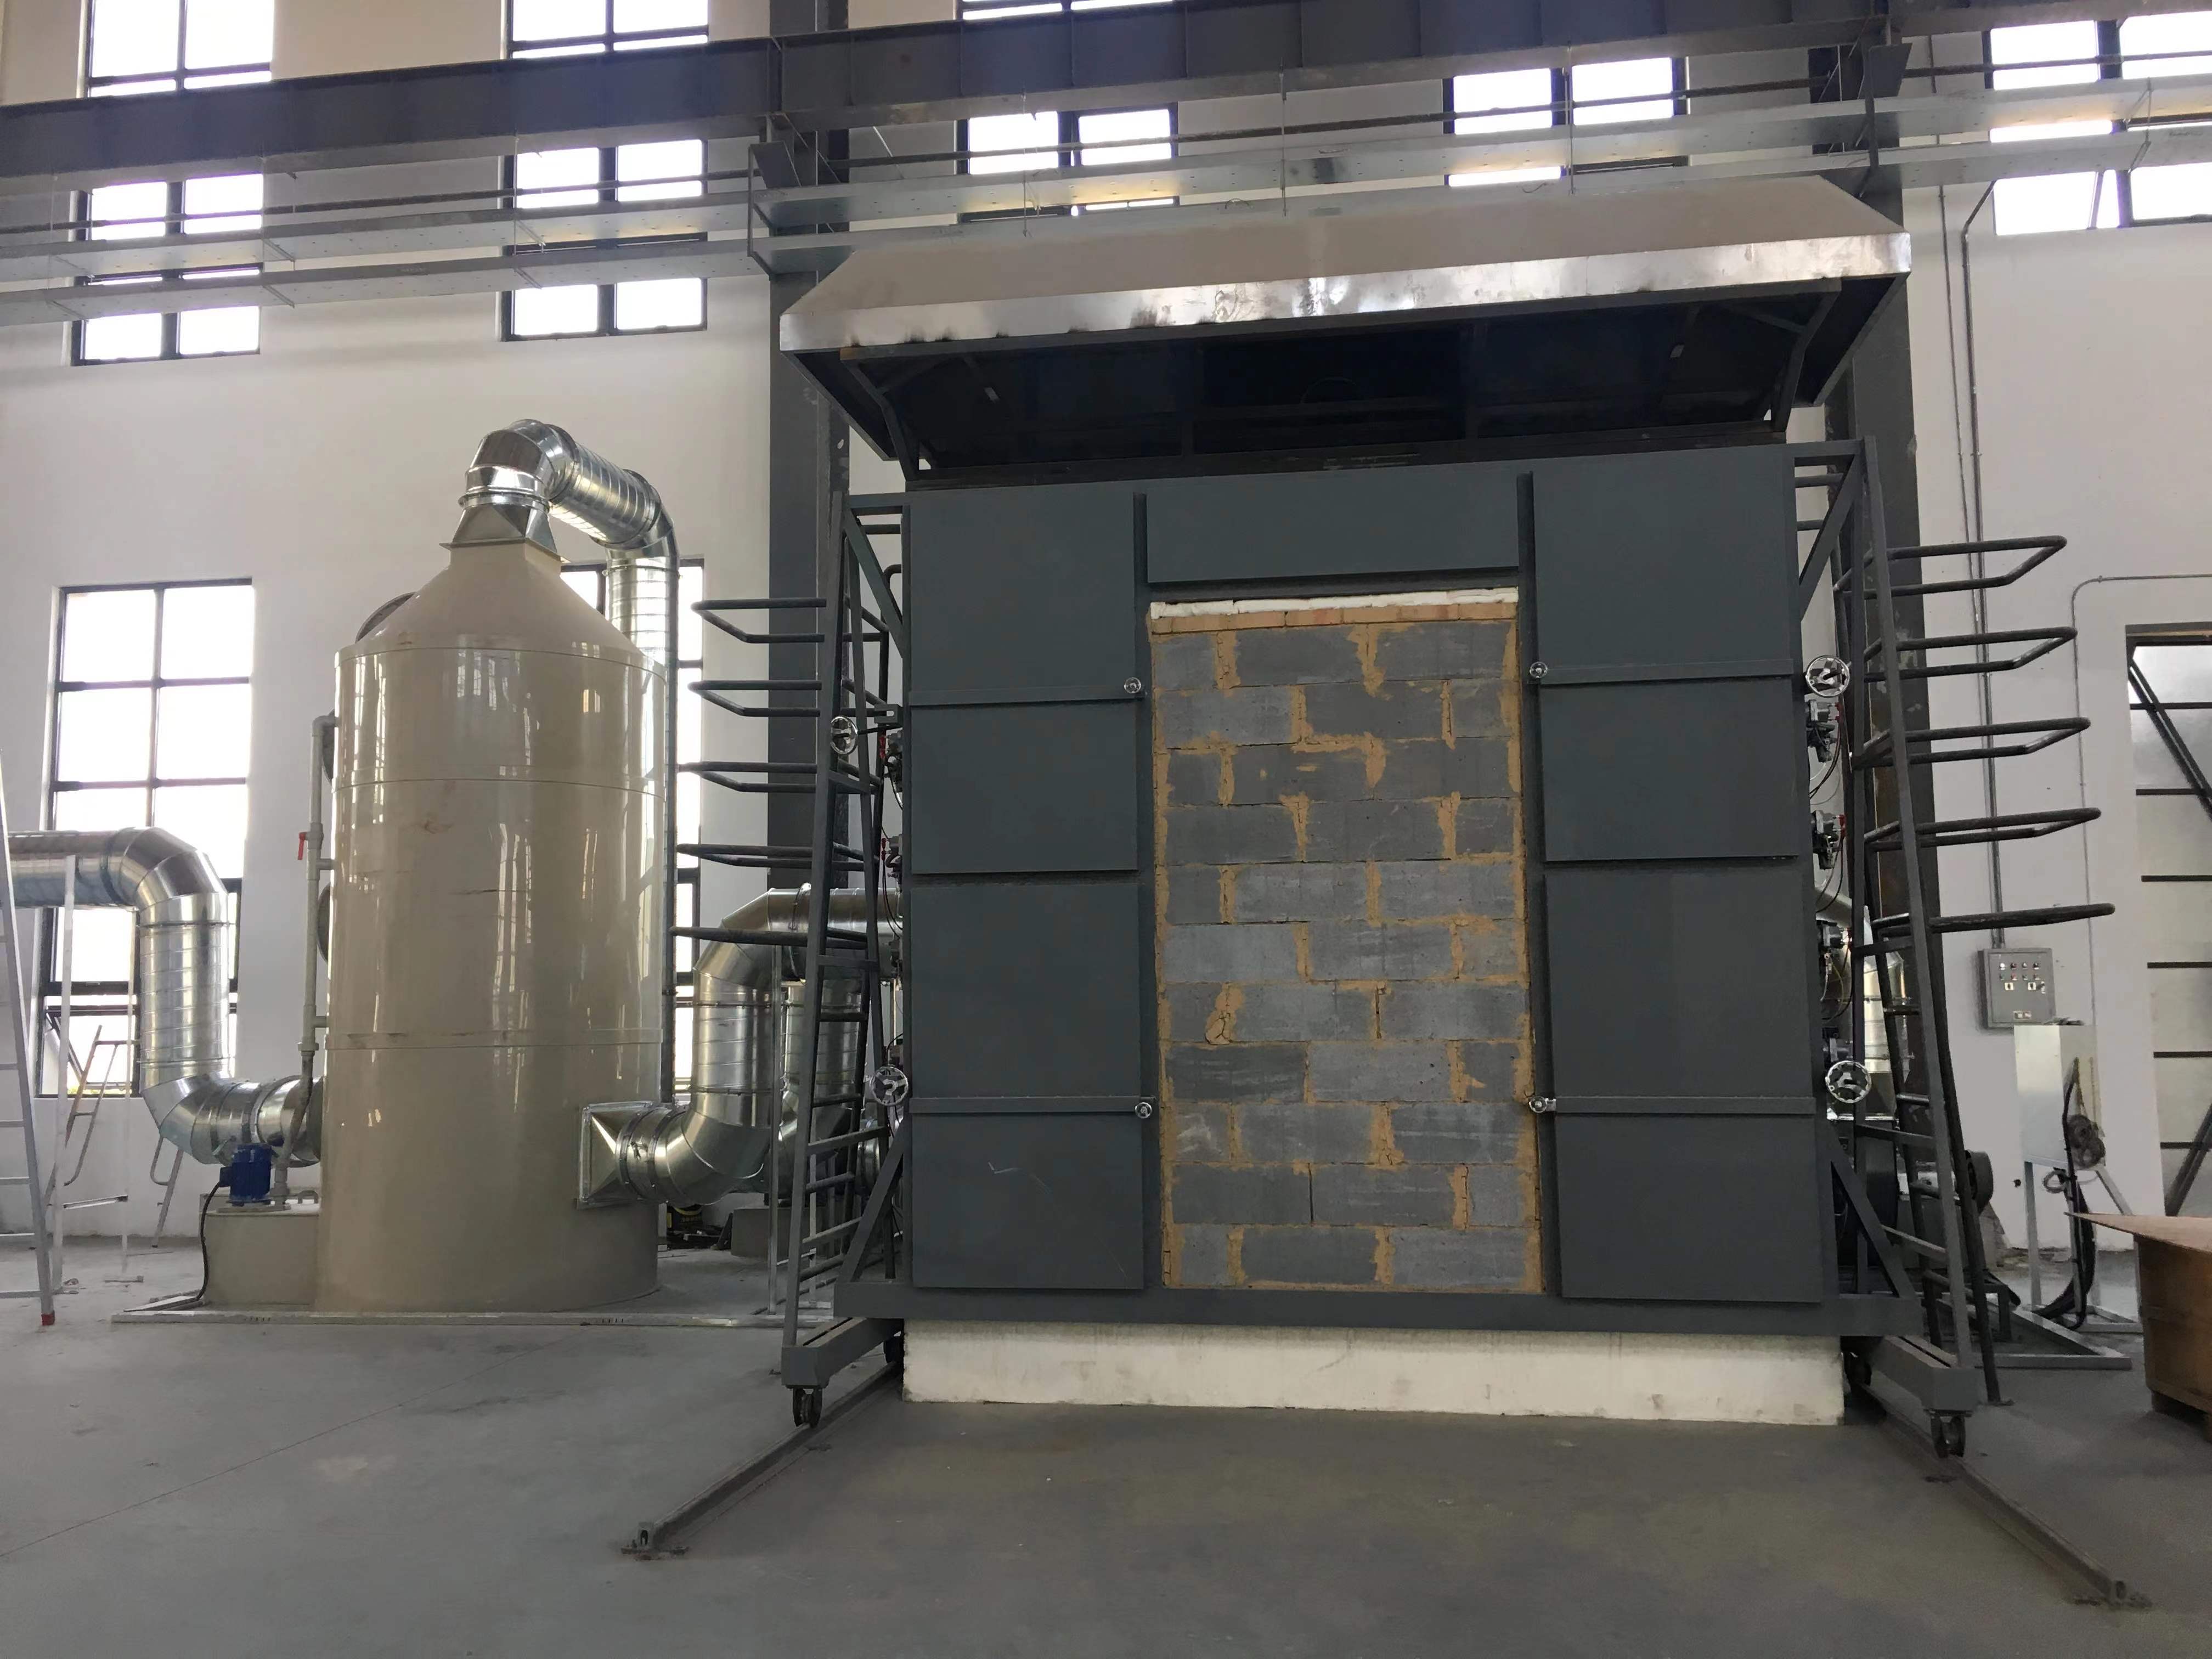 ASTM E119 Large Scale Vertical Fire Resistance Test Furnace